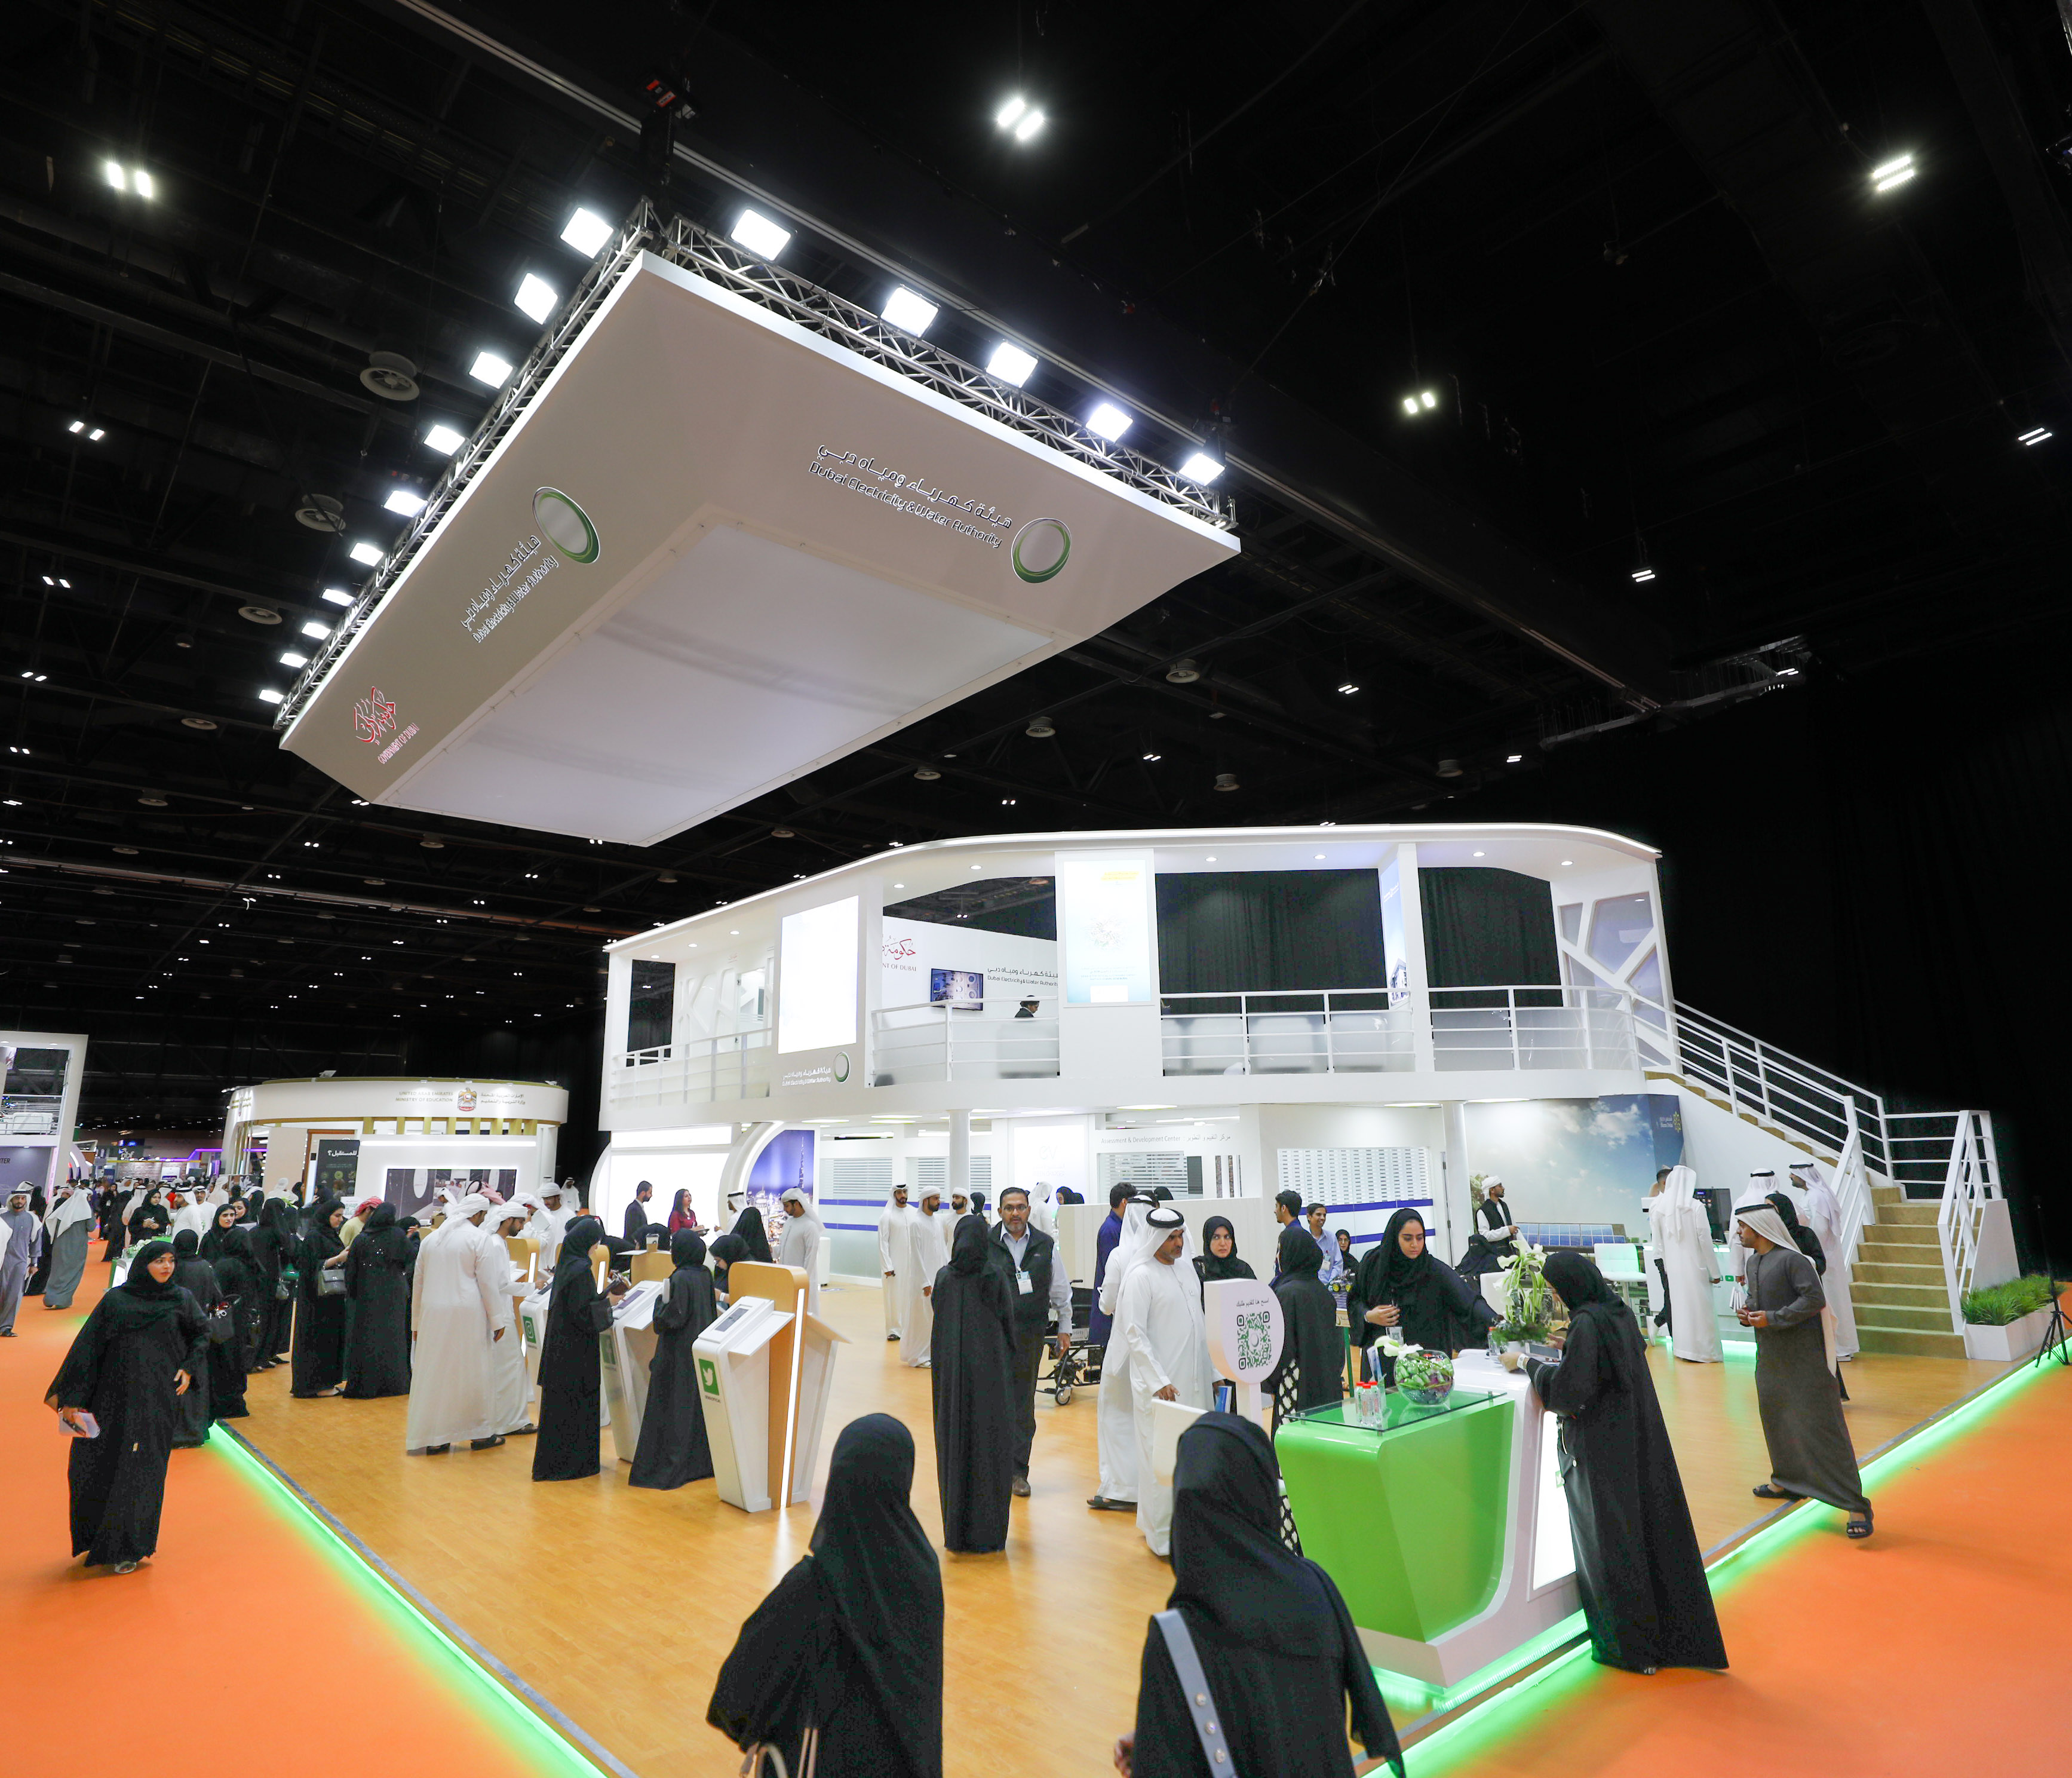 DEWA seeks to attract national talent and promote inclusive employment at Careers UAE 2019